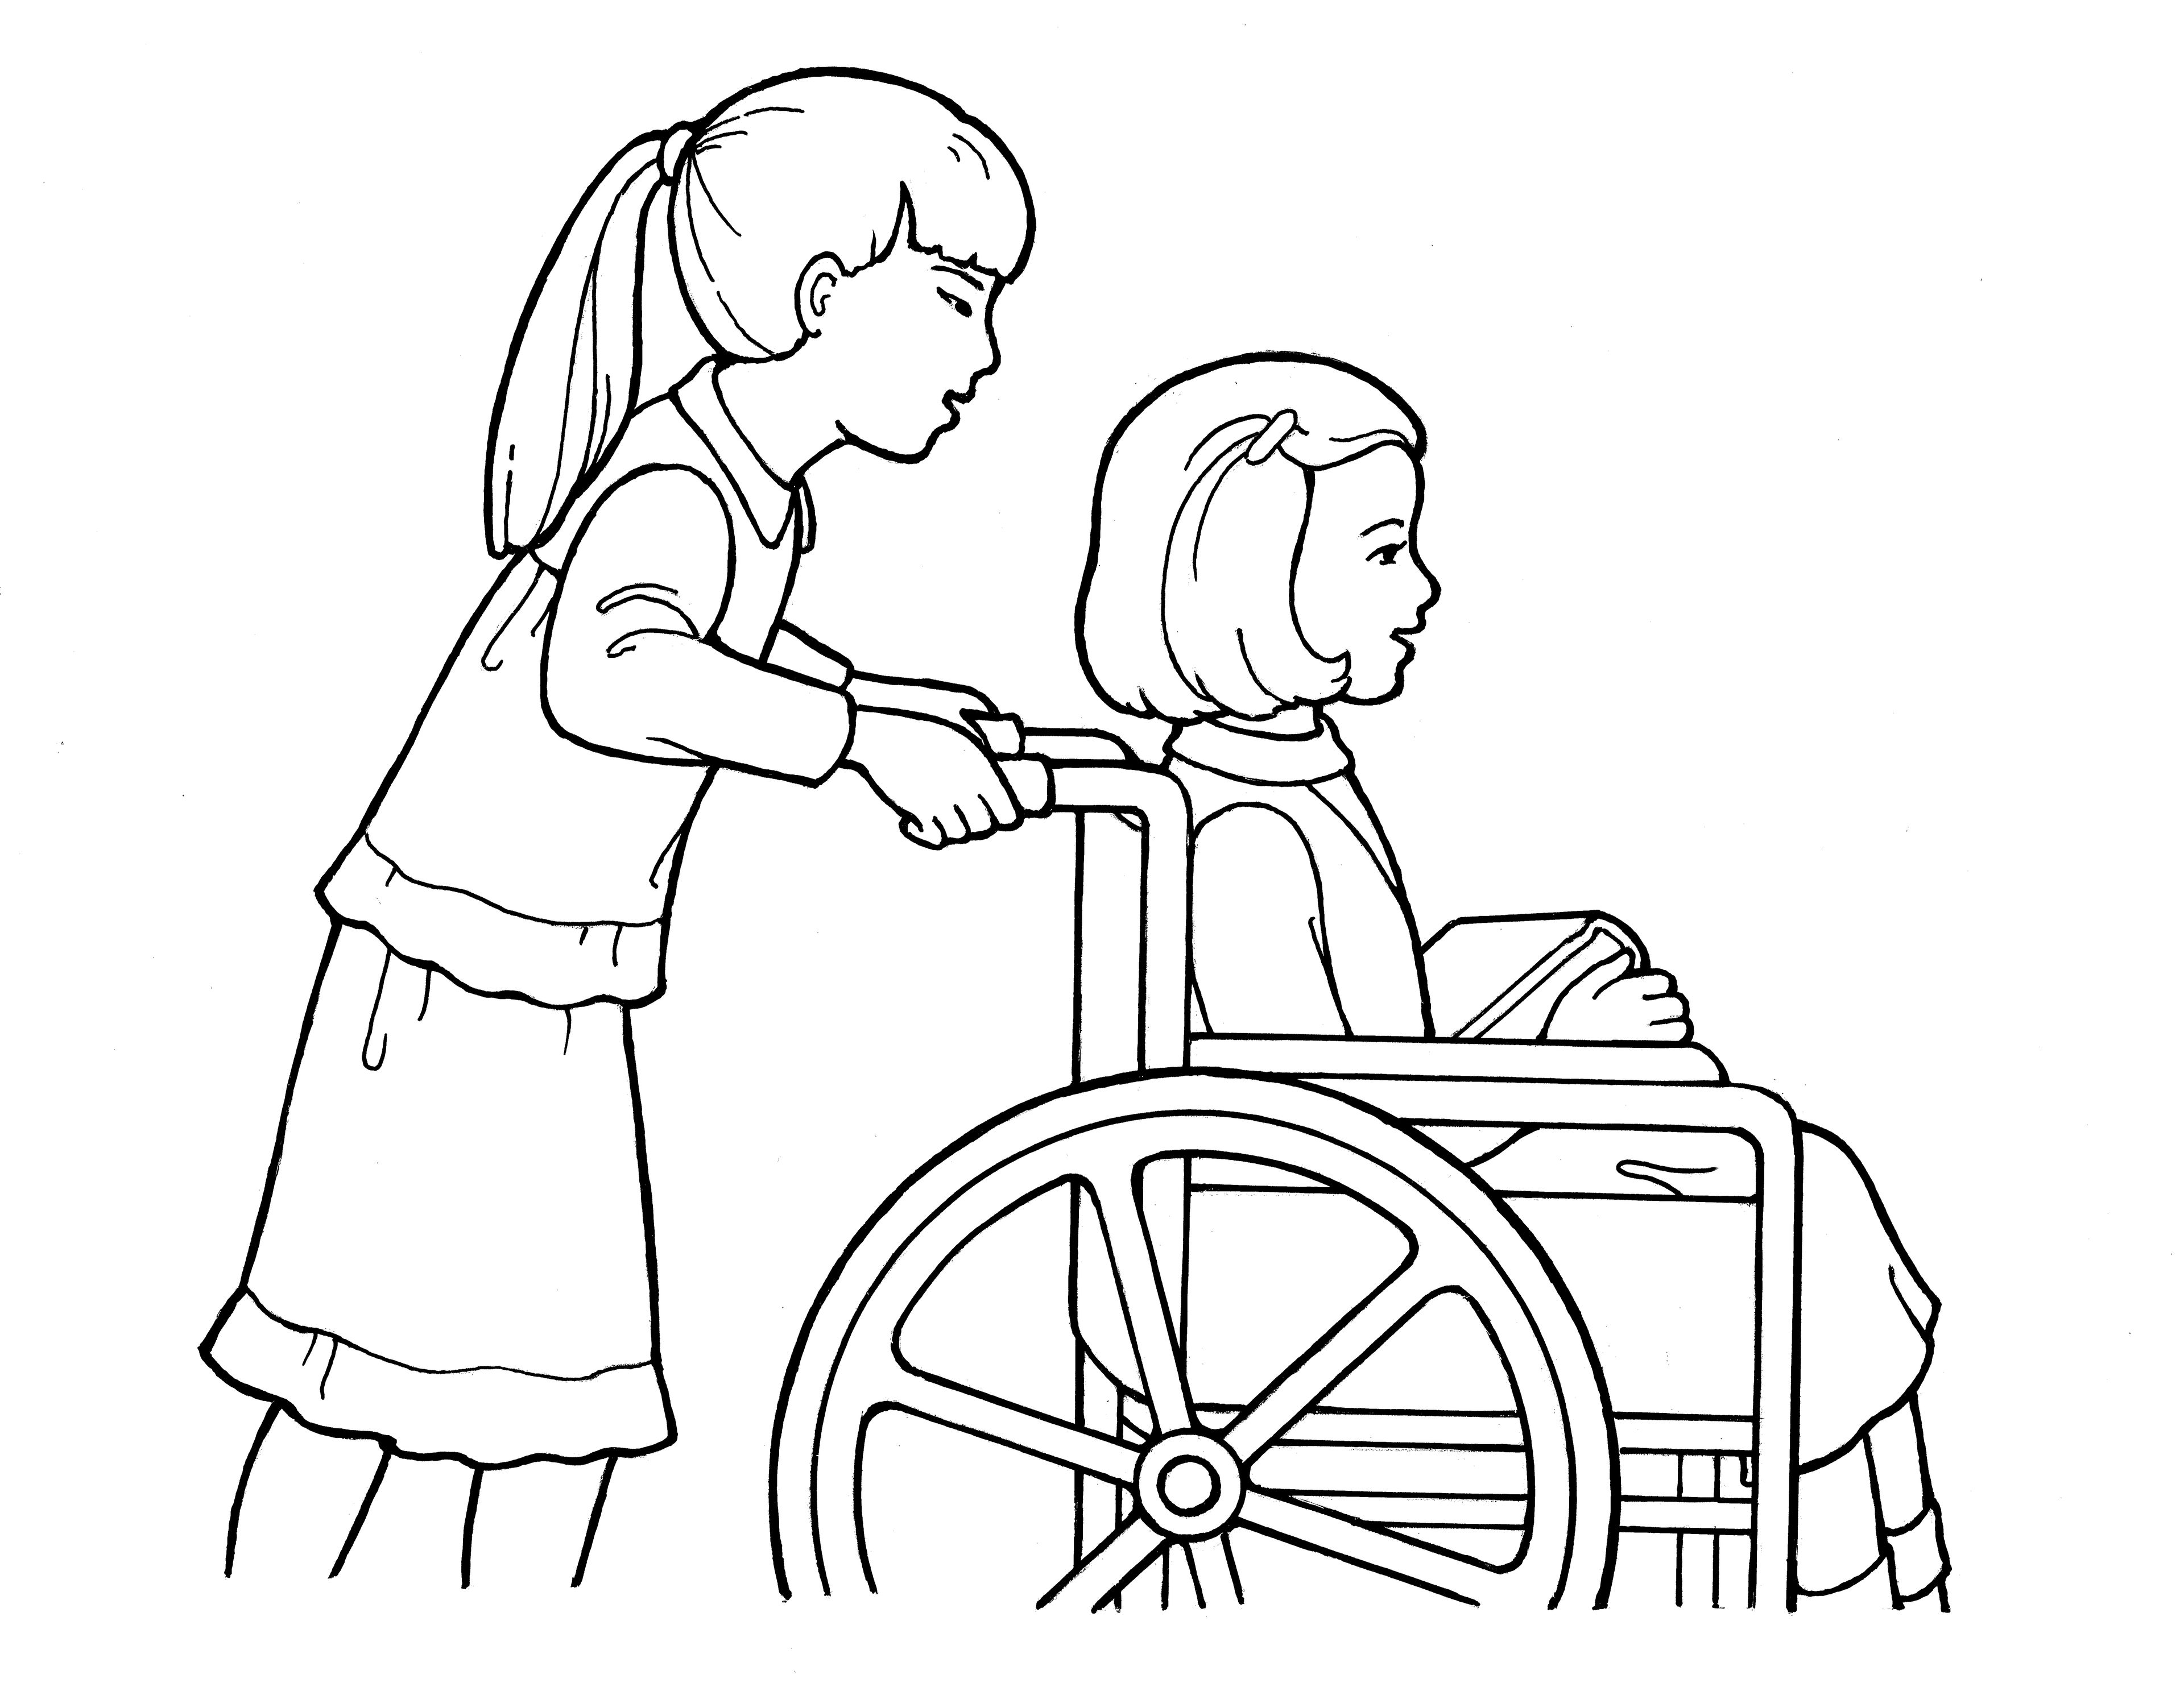 A line drawing of a Primary girl pushing another girl in a wheelchair.